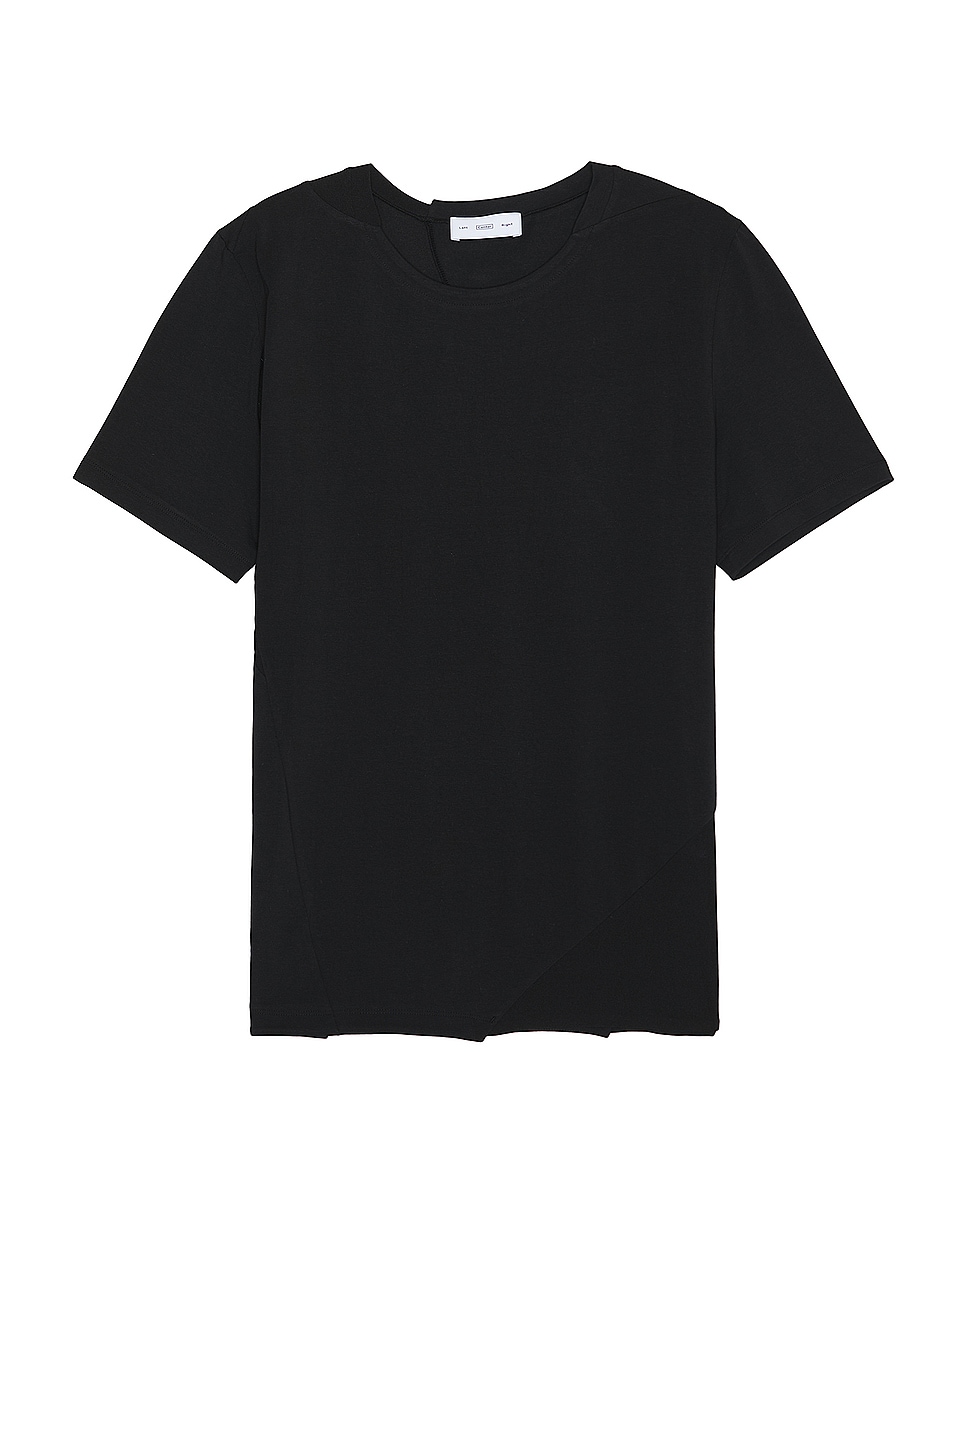 Image 1 of POST ARCHIVE FACTION (PAF) 6.0 Tee Center in Black